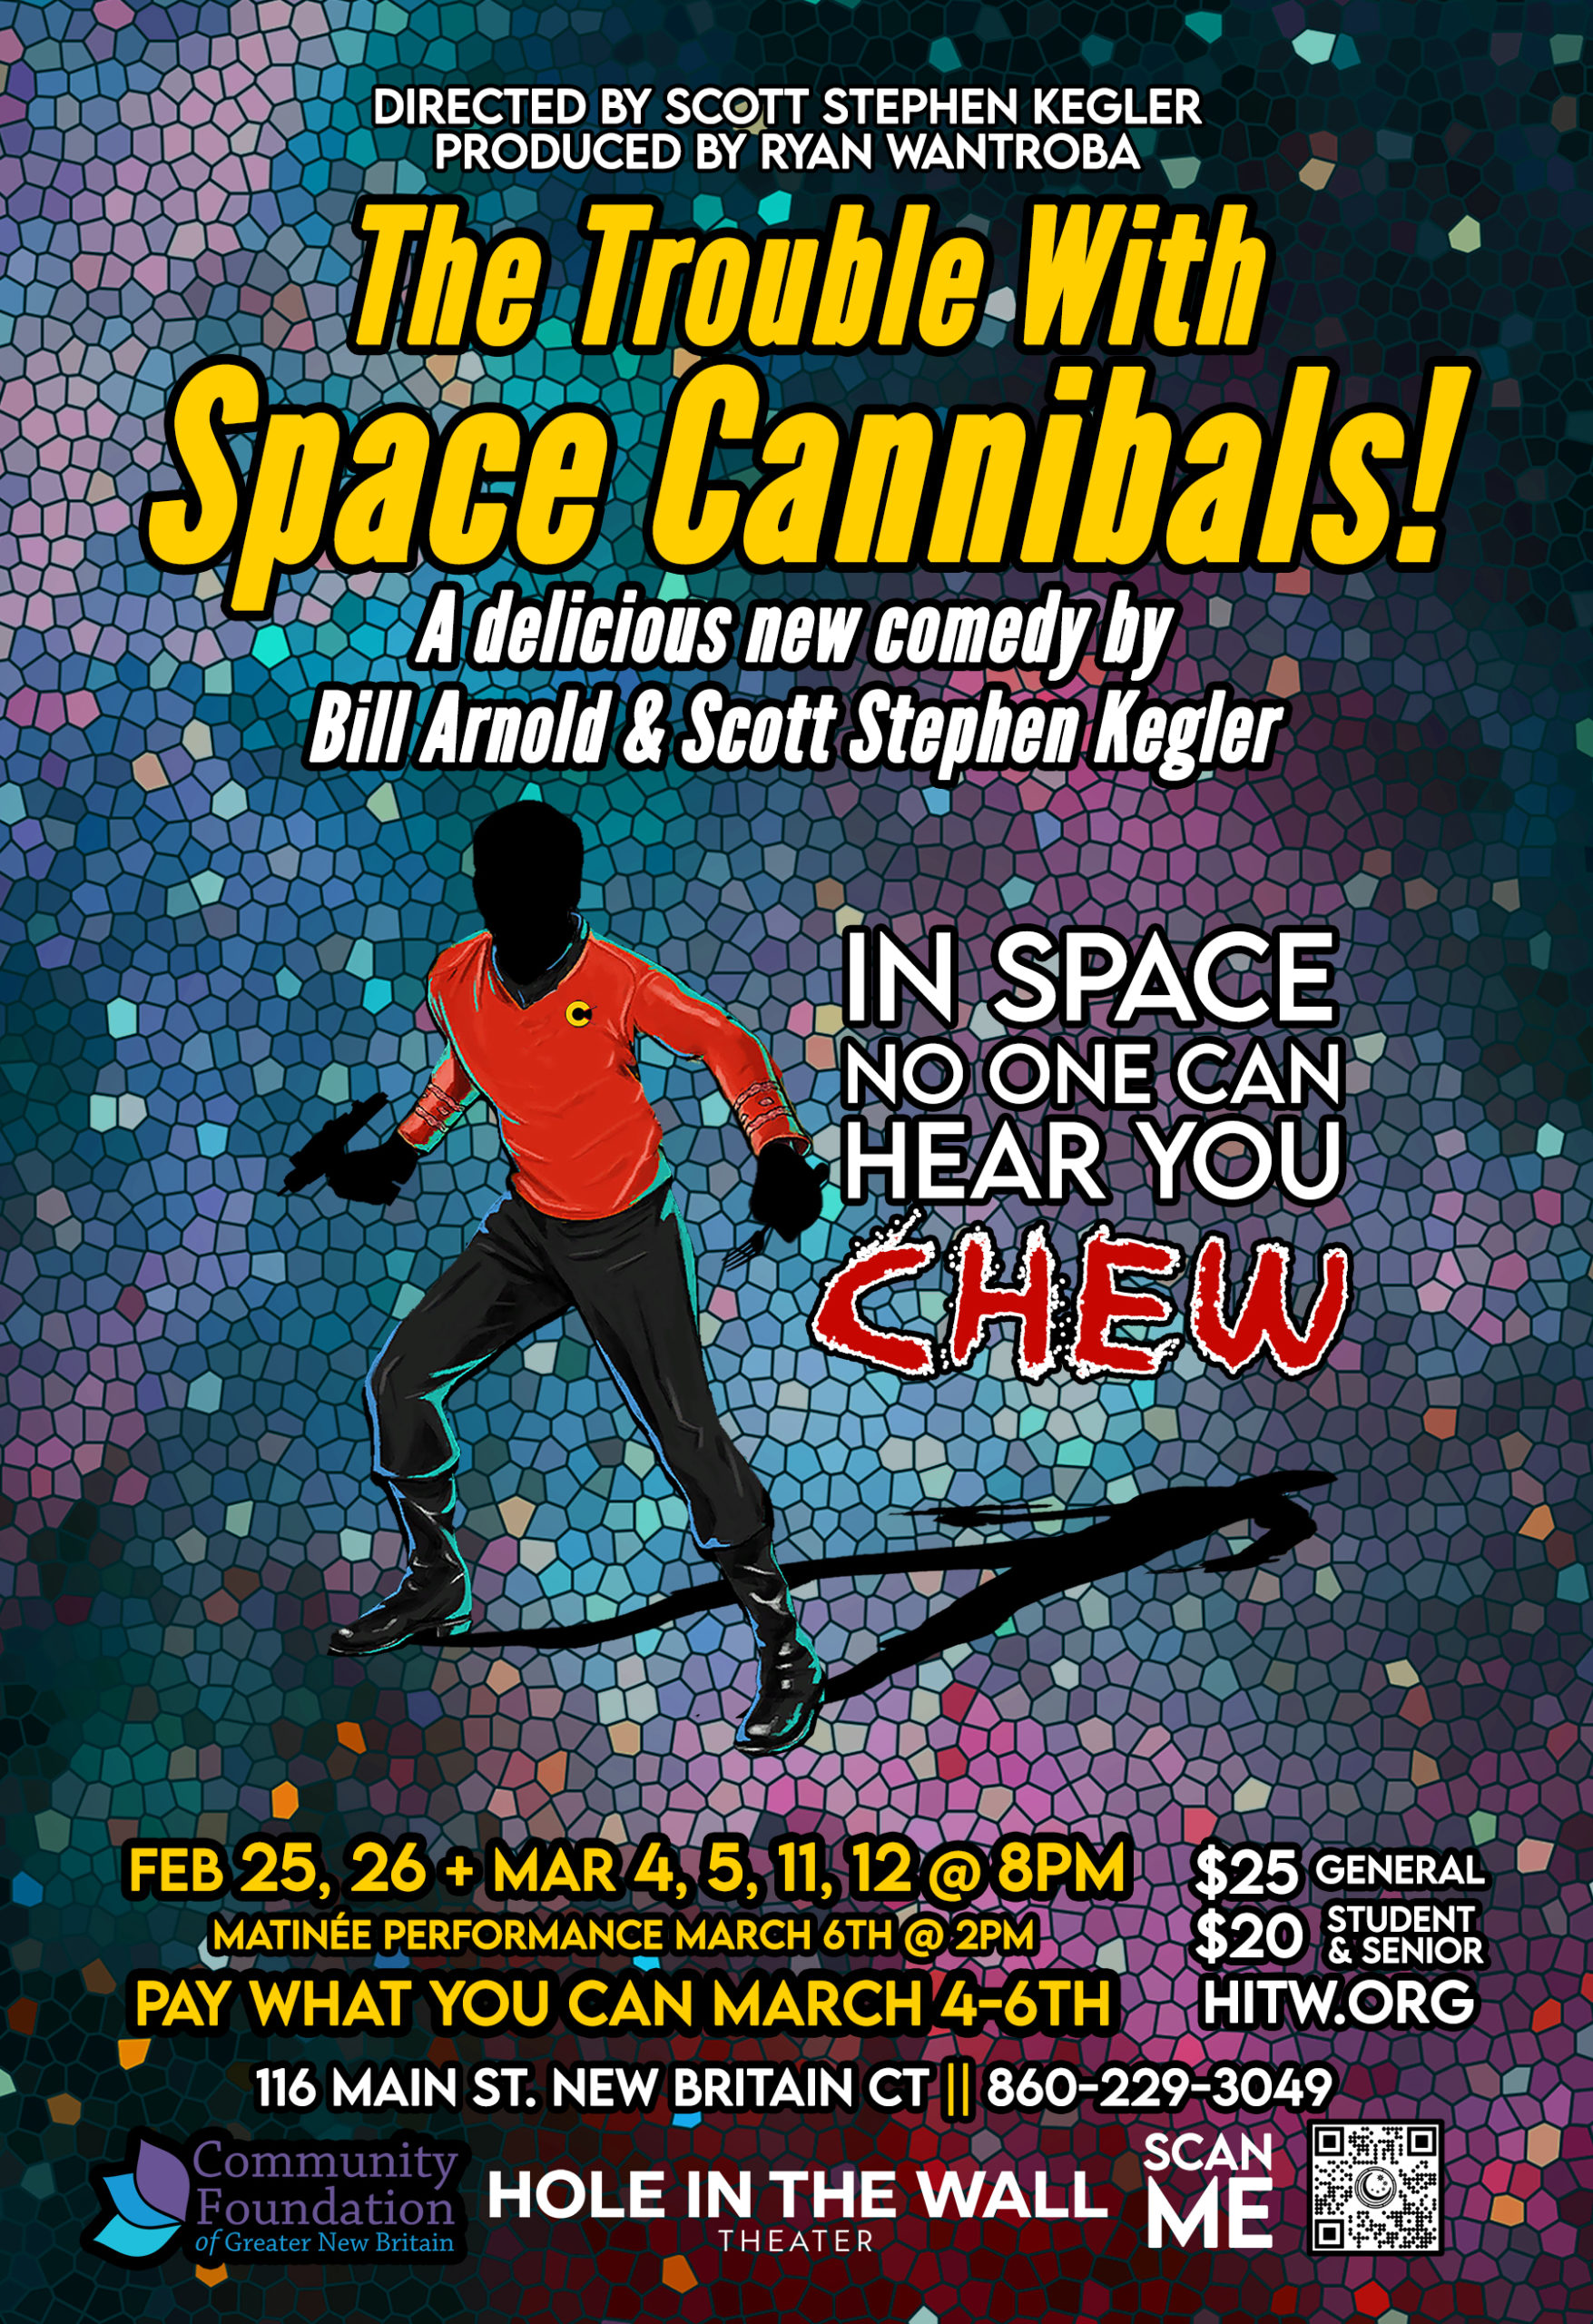 The Trouble With Space Cannibals Cast Announcement!